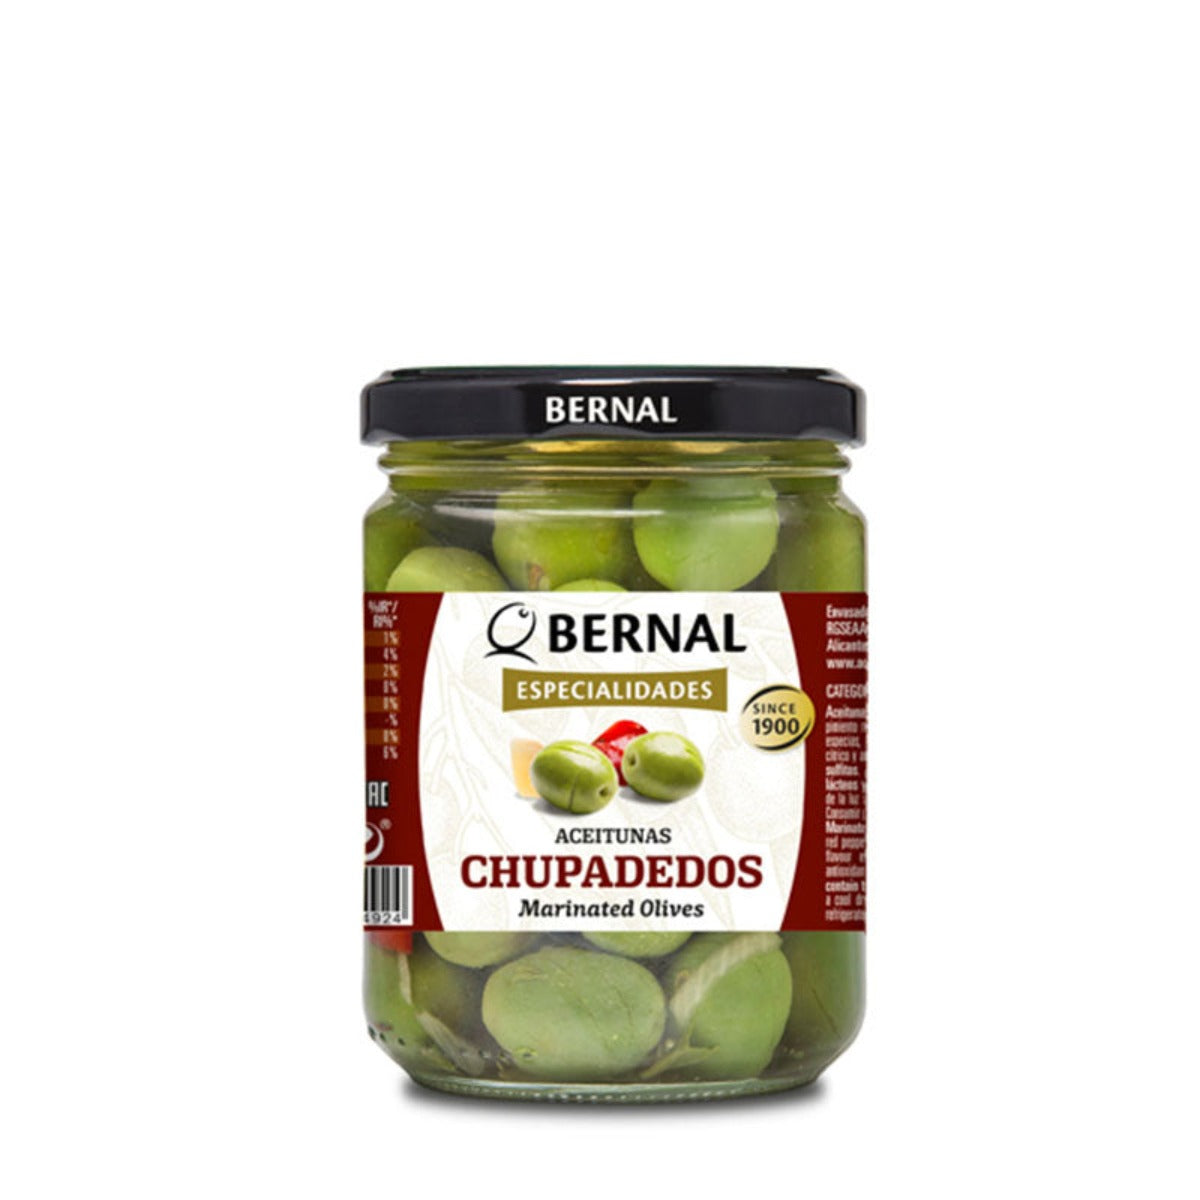 Bernal Especialidades Aceitunas Chupadedos Spanish Marinated Olives 2 pack 436g x2 Best Before End of 2027